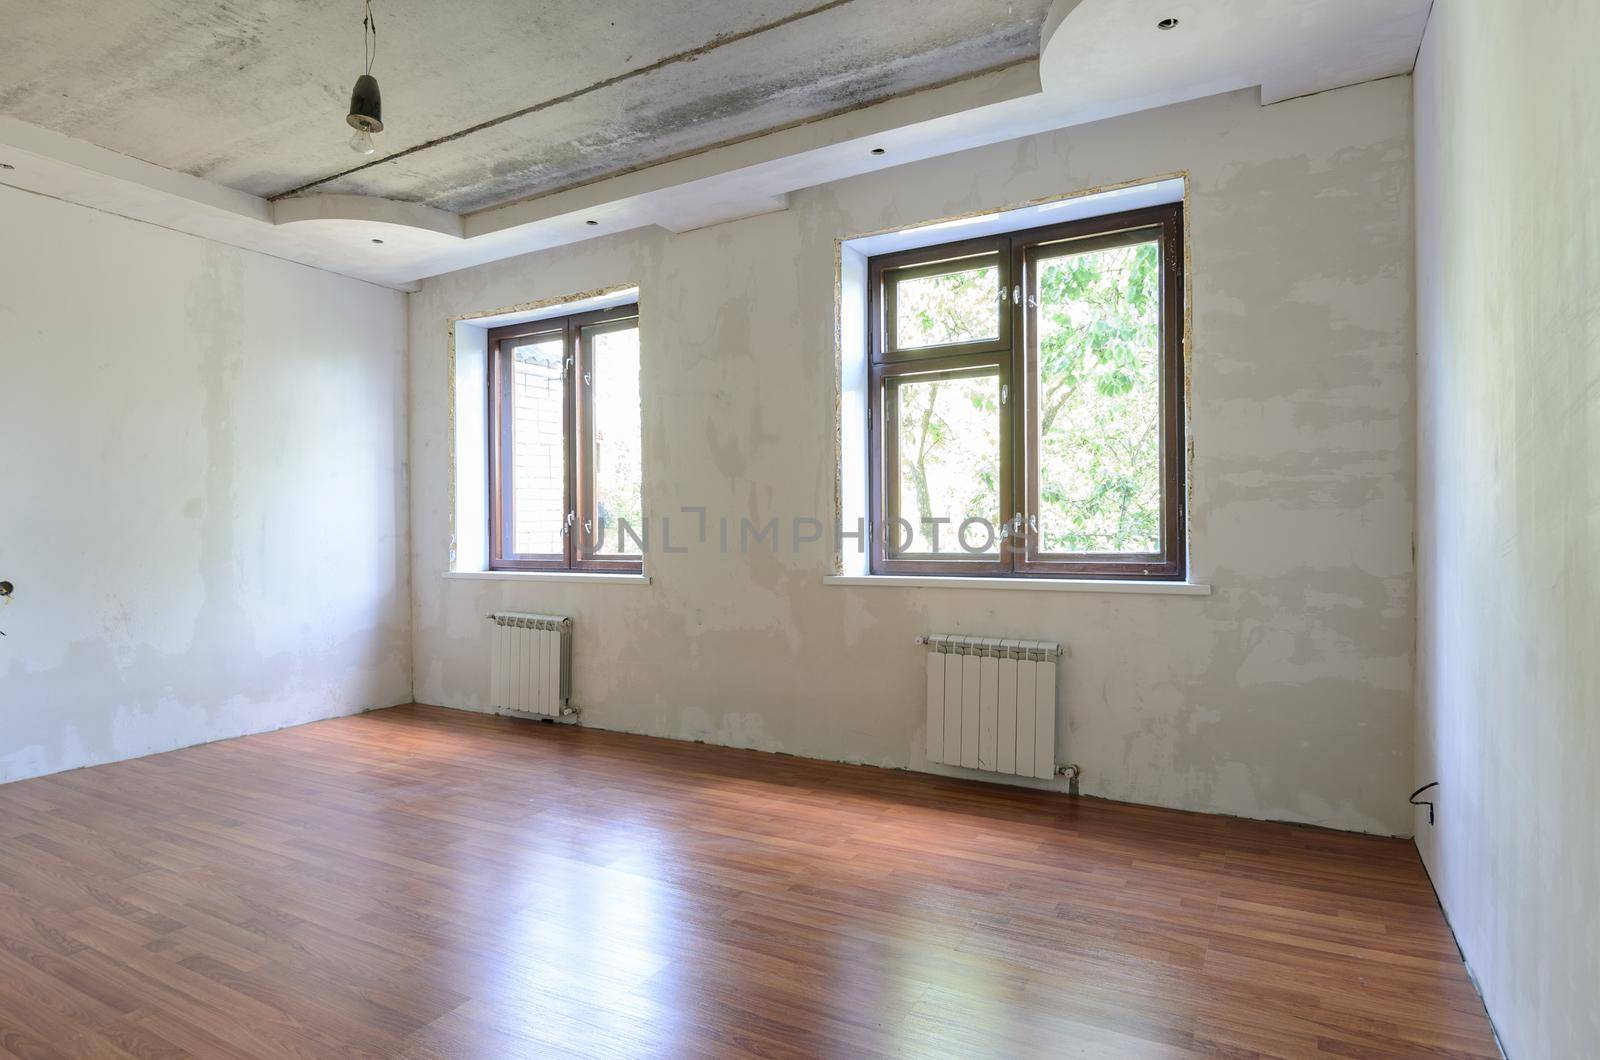 Empty room interior, wall view with windows a